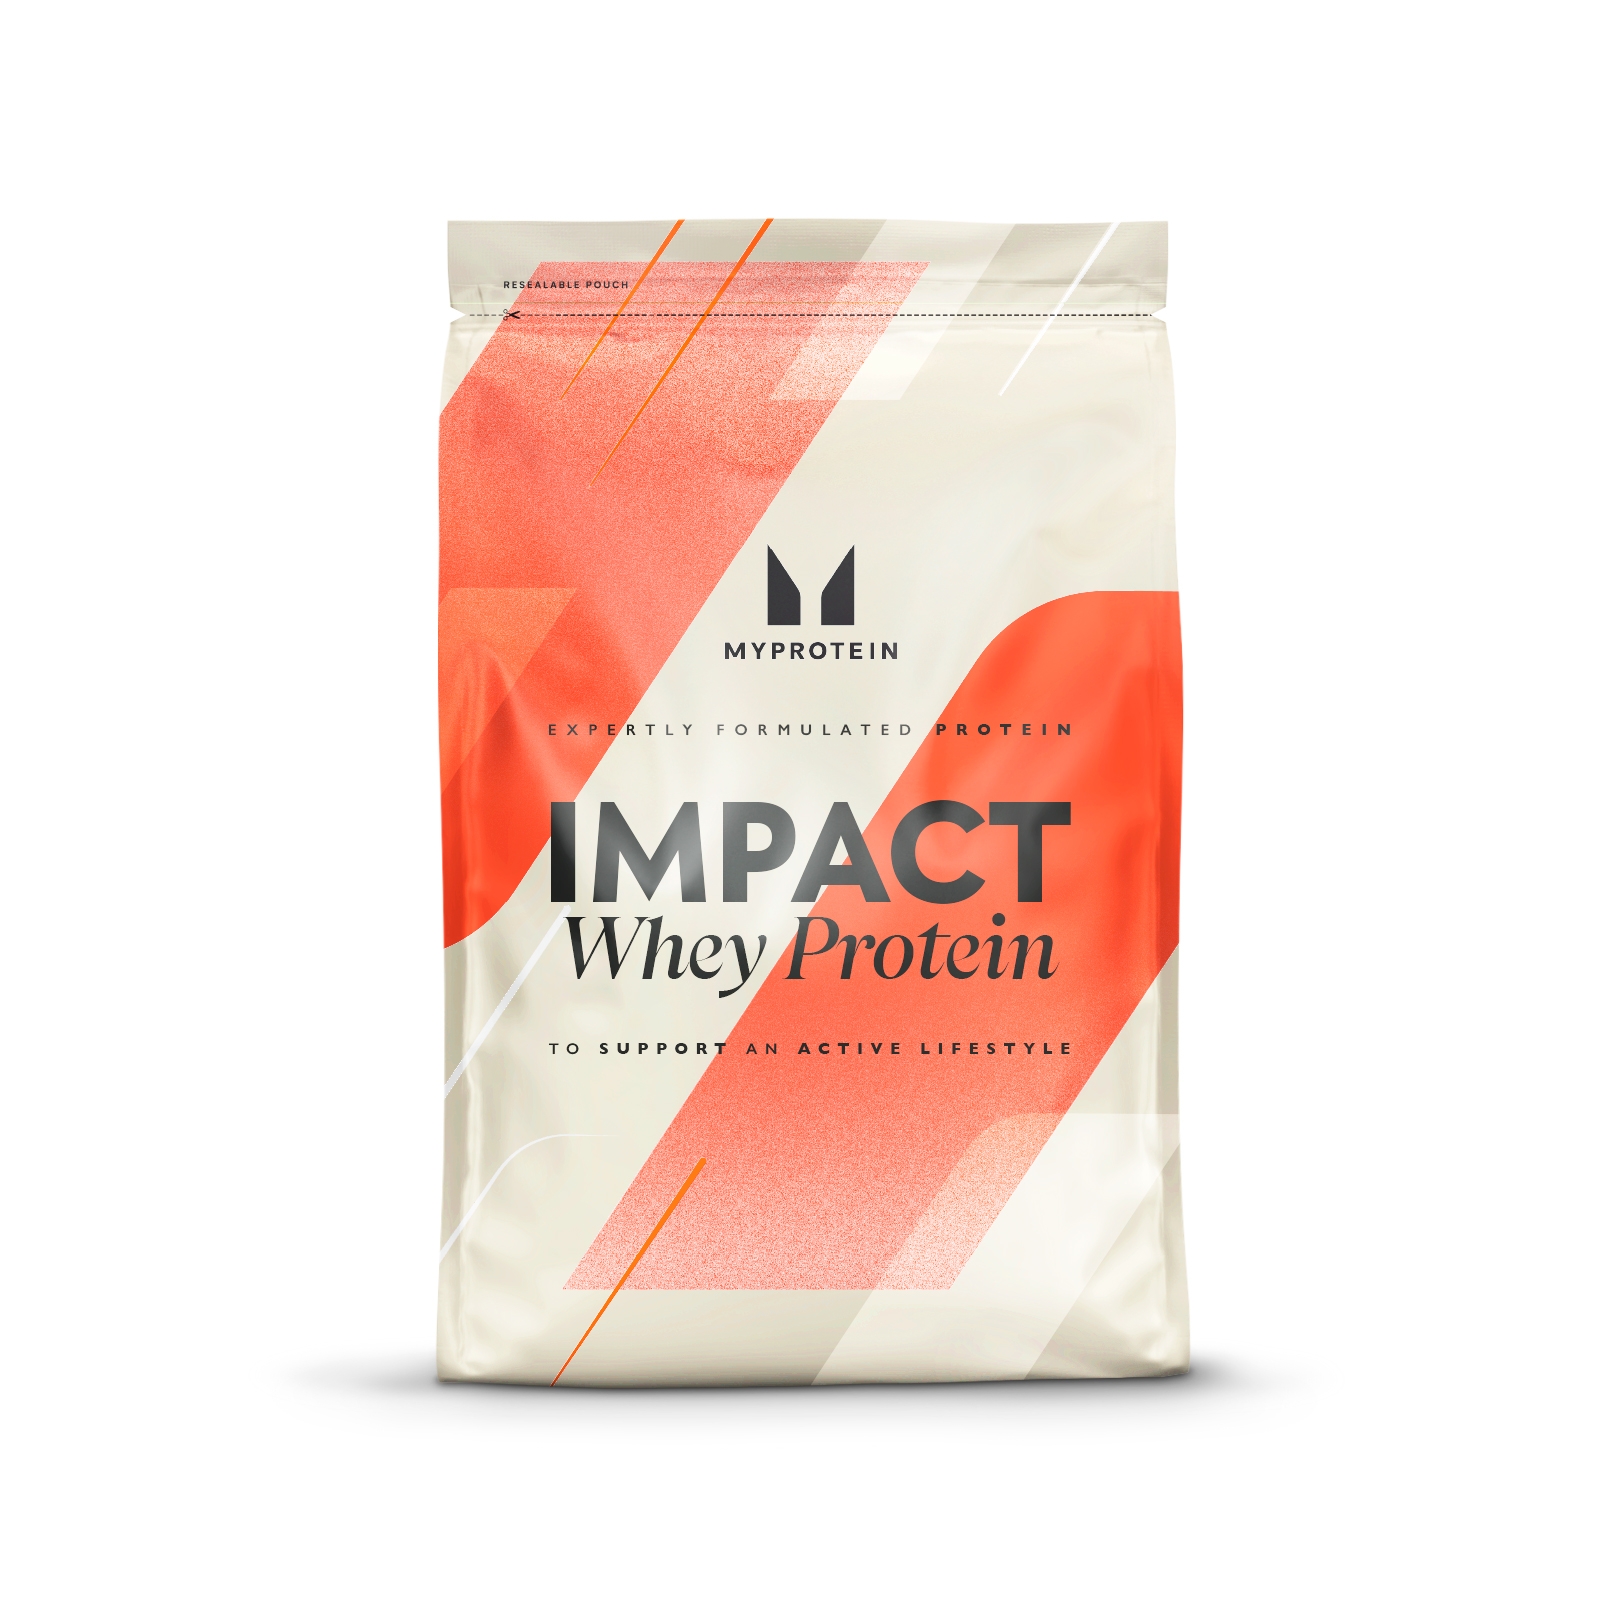 Image of Myprotein Impact Whey Protein - 25kg - Coco 11781148 PT21